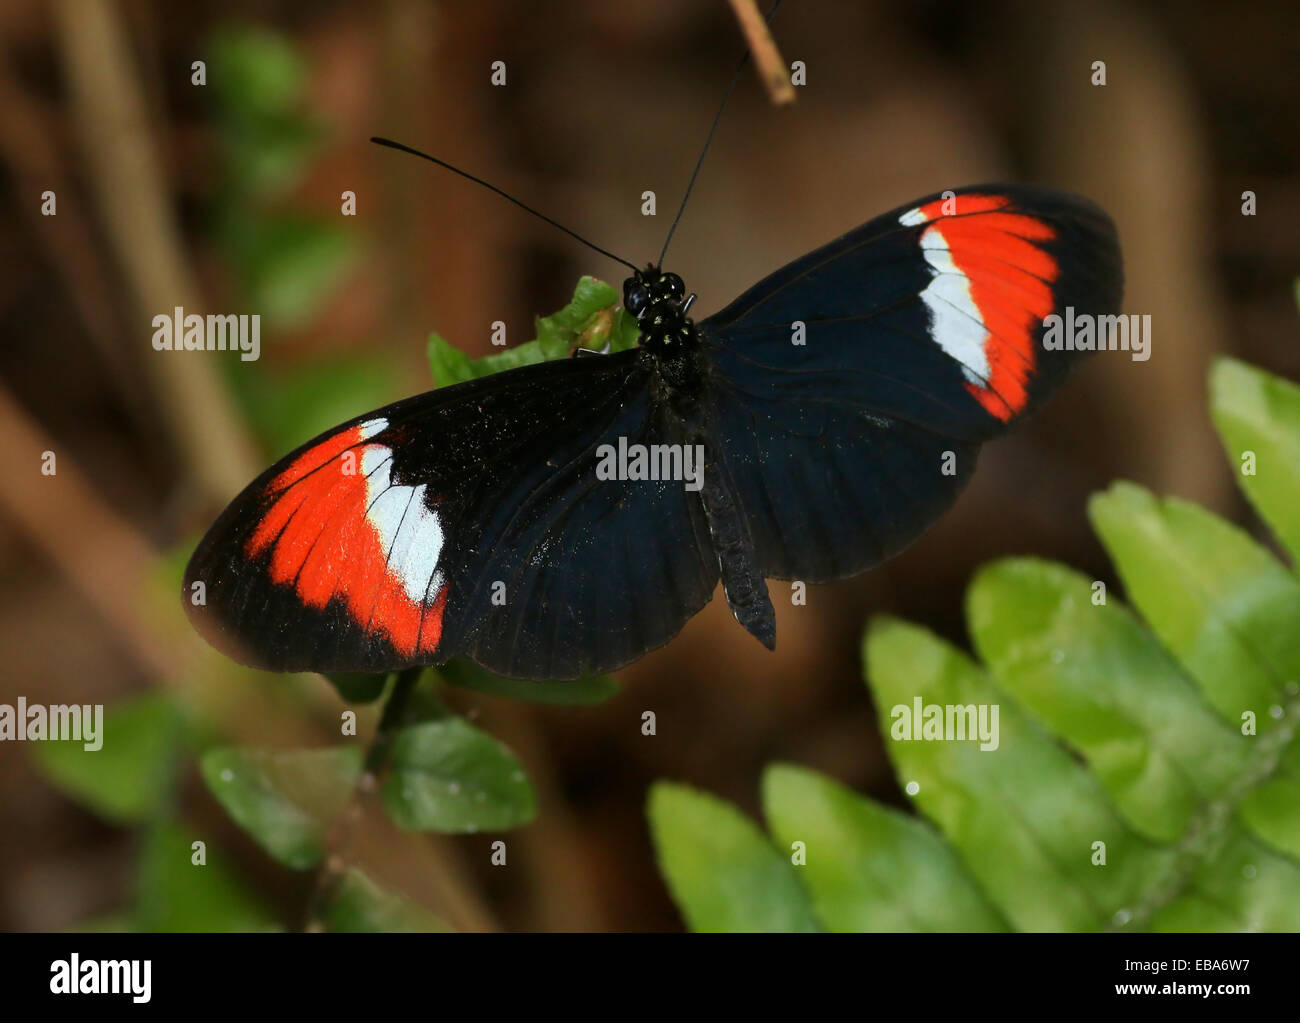 South American Heliconius heurippa butterfly, often considered a hybrid of Heliconius cydno and Heliconius melpomene. Stock Photo